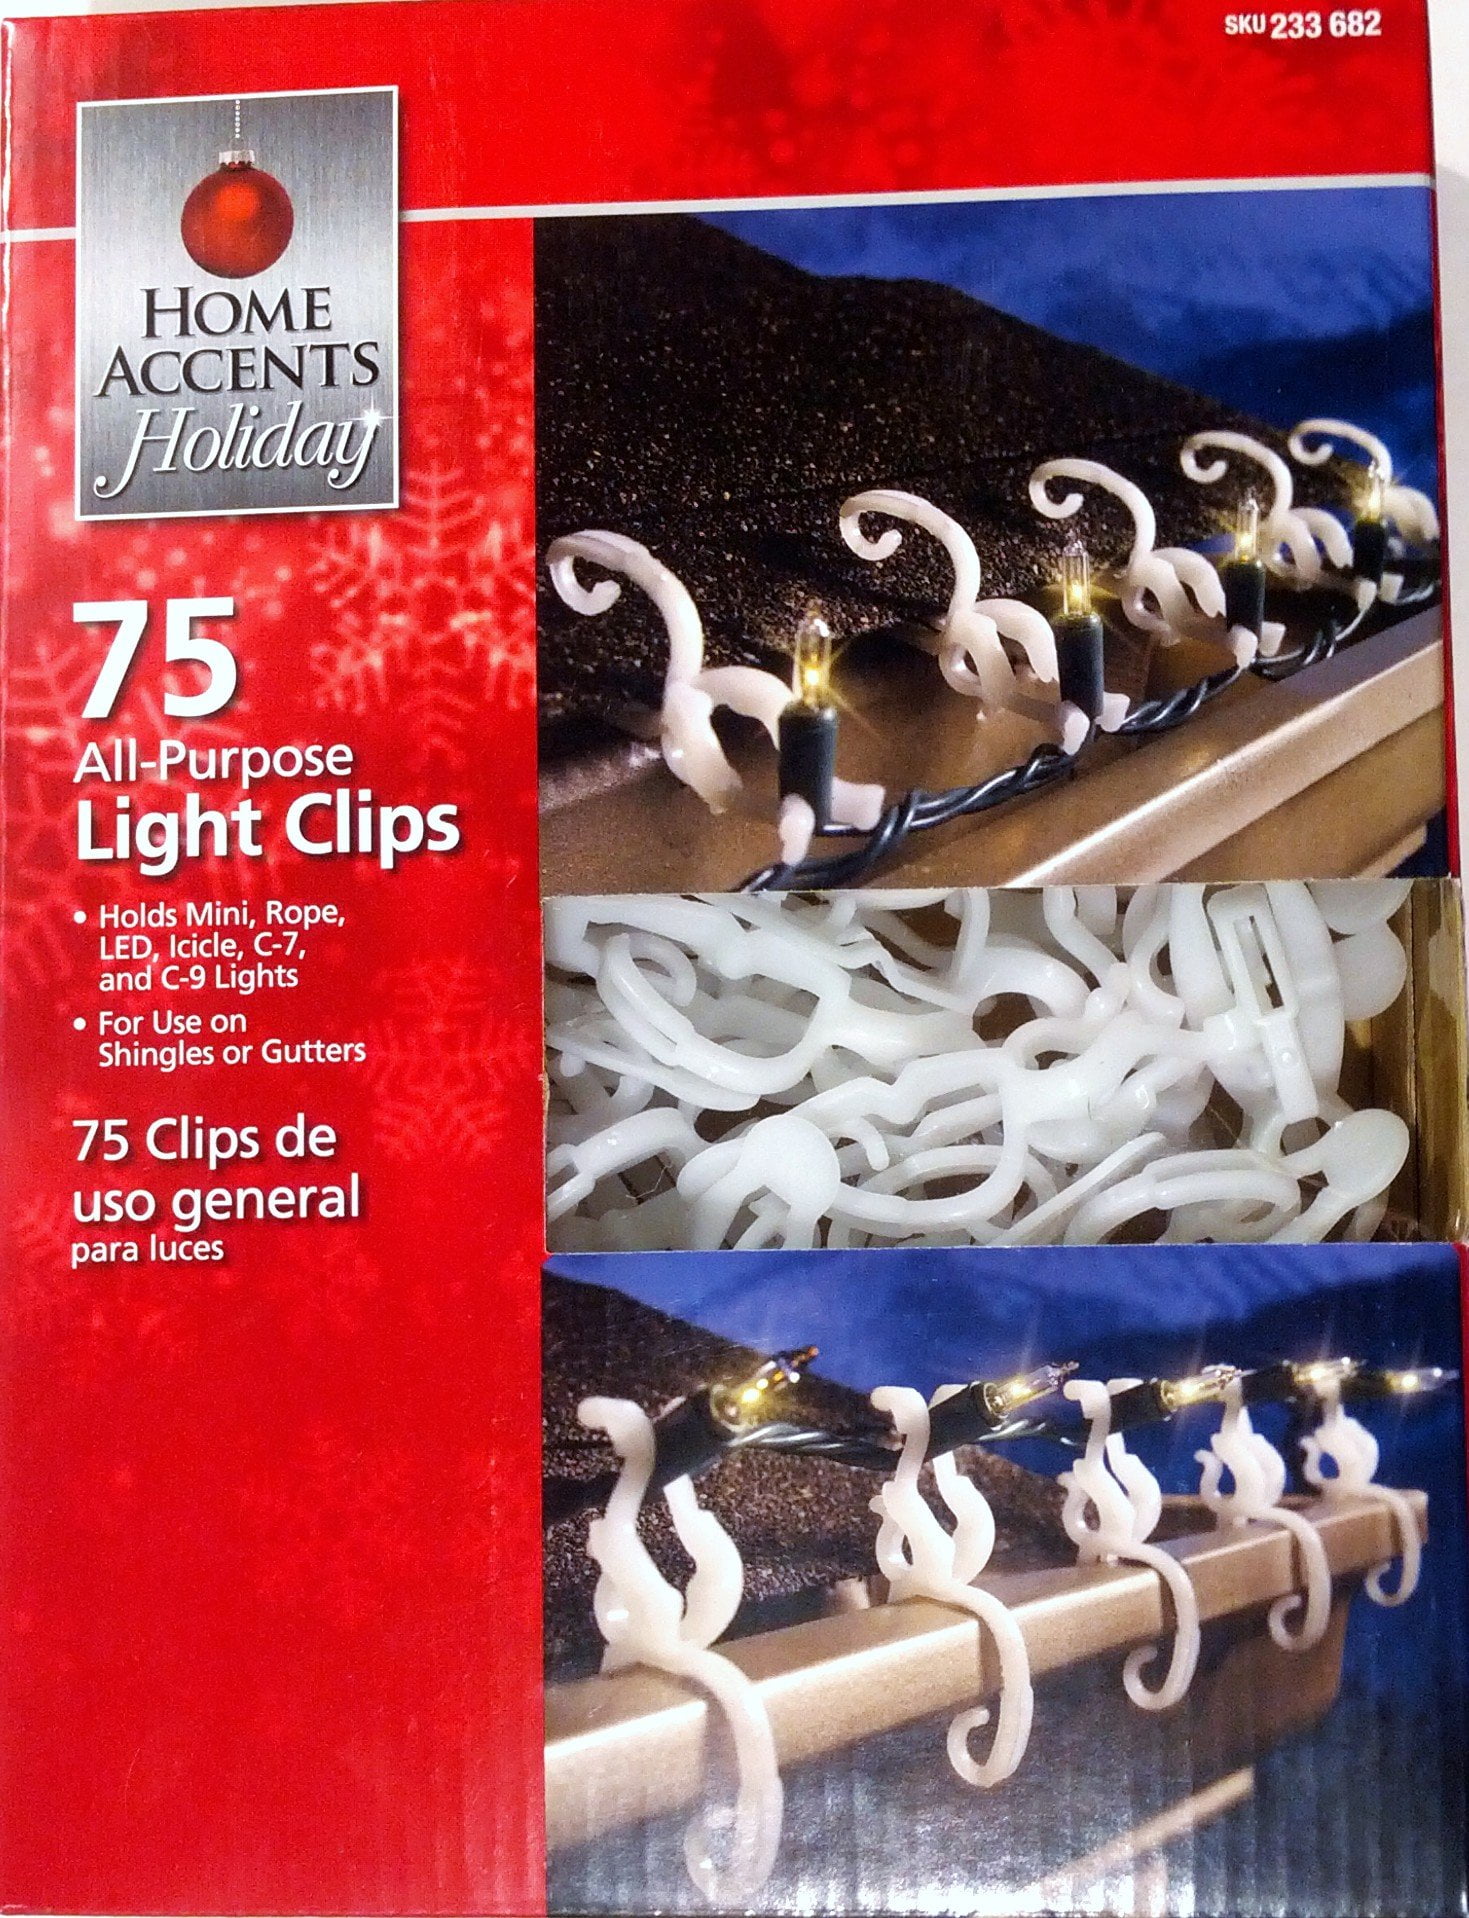 lot new in package Home Accents EZ Gutter Hooks 8 Pack of 25x8 total count 200 